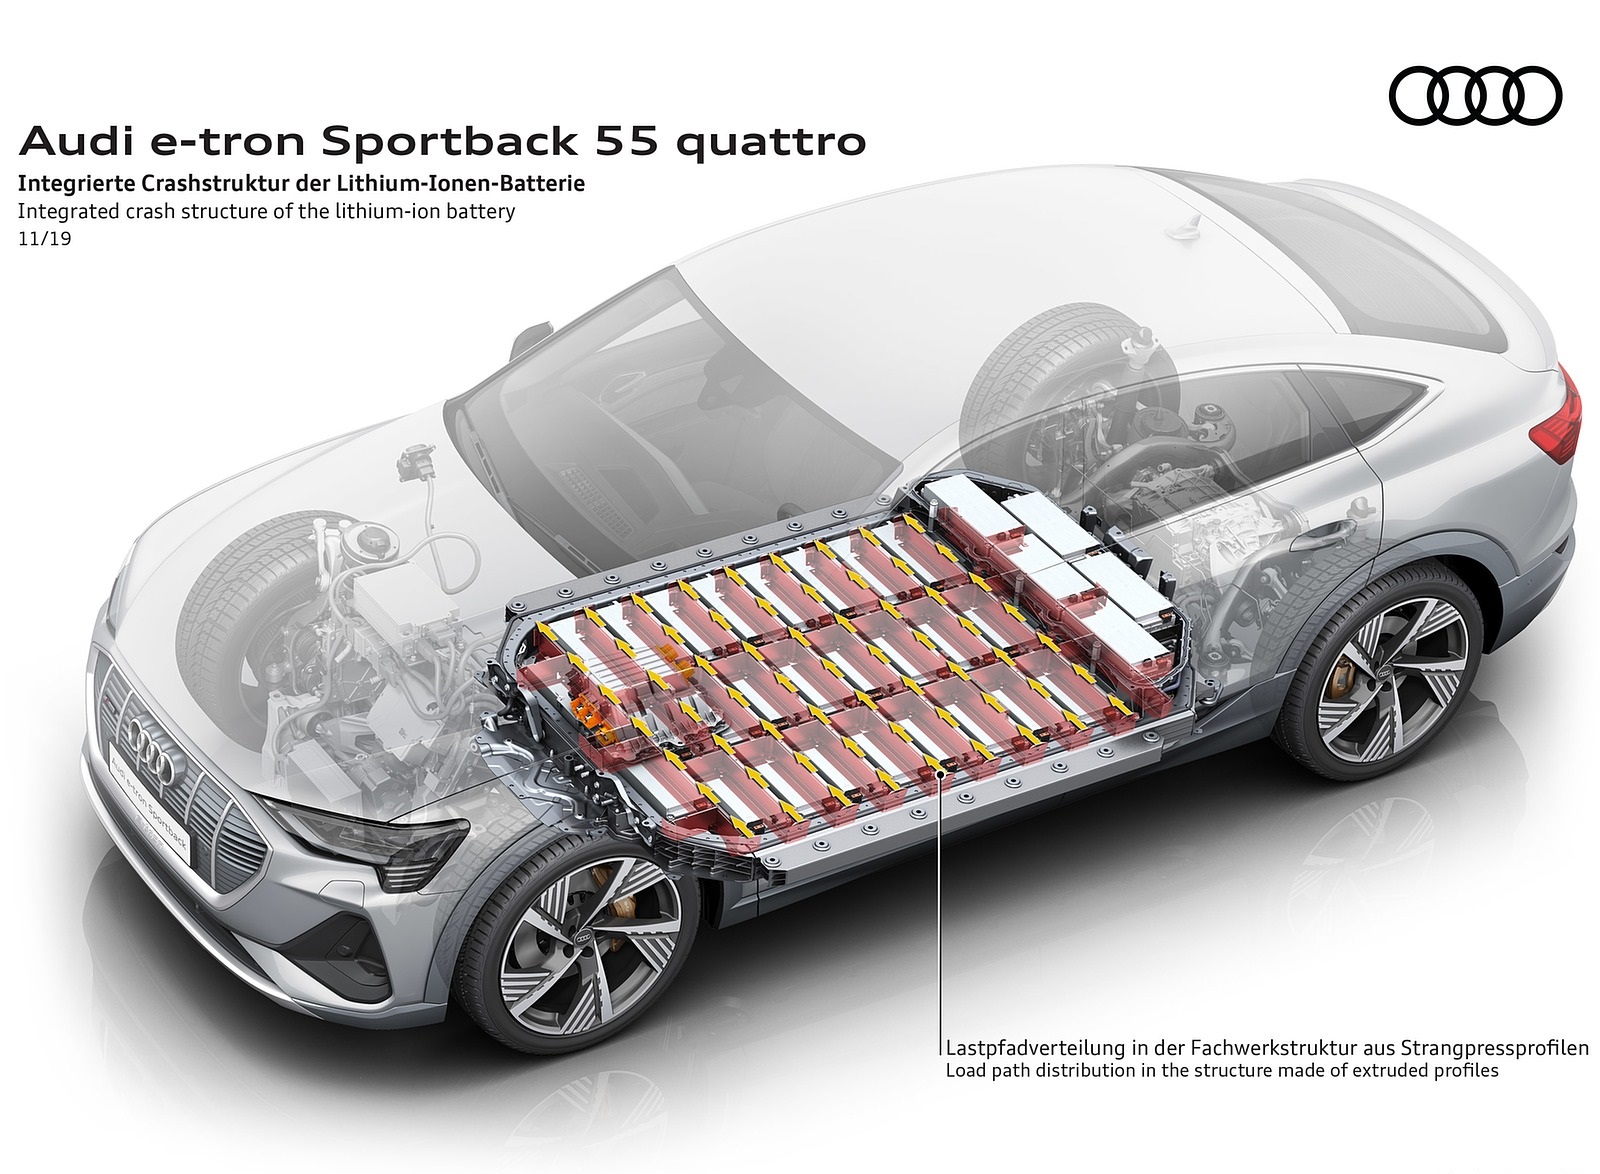 2020 Audi e-tron Sportback Integrated crash structure of the lithium-ion battery Wallpapers #94 of 145